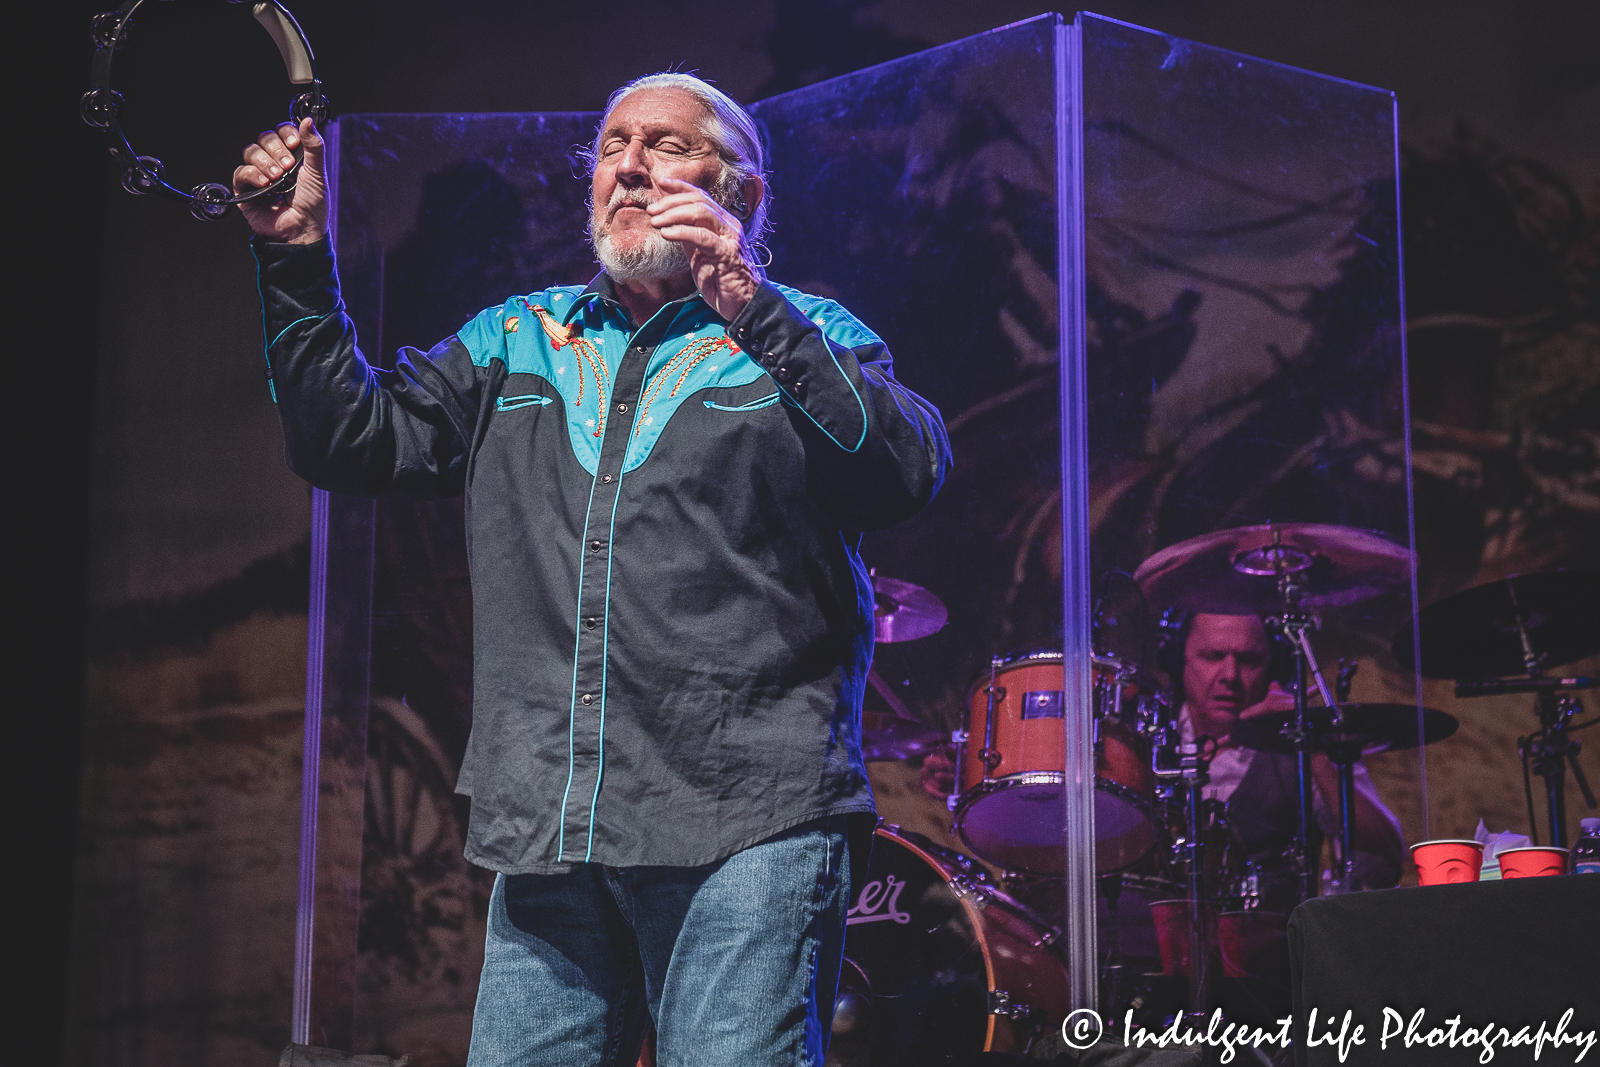 The Marshall Tucker Band lead singer Doug Gray and drummer B.B. Borden performing together at Ameristar Casino in Kansas City, MO on October 28, 2022.